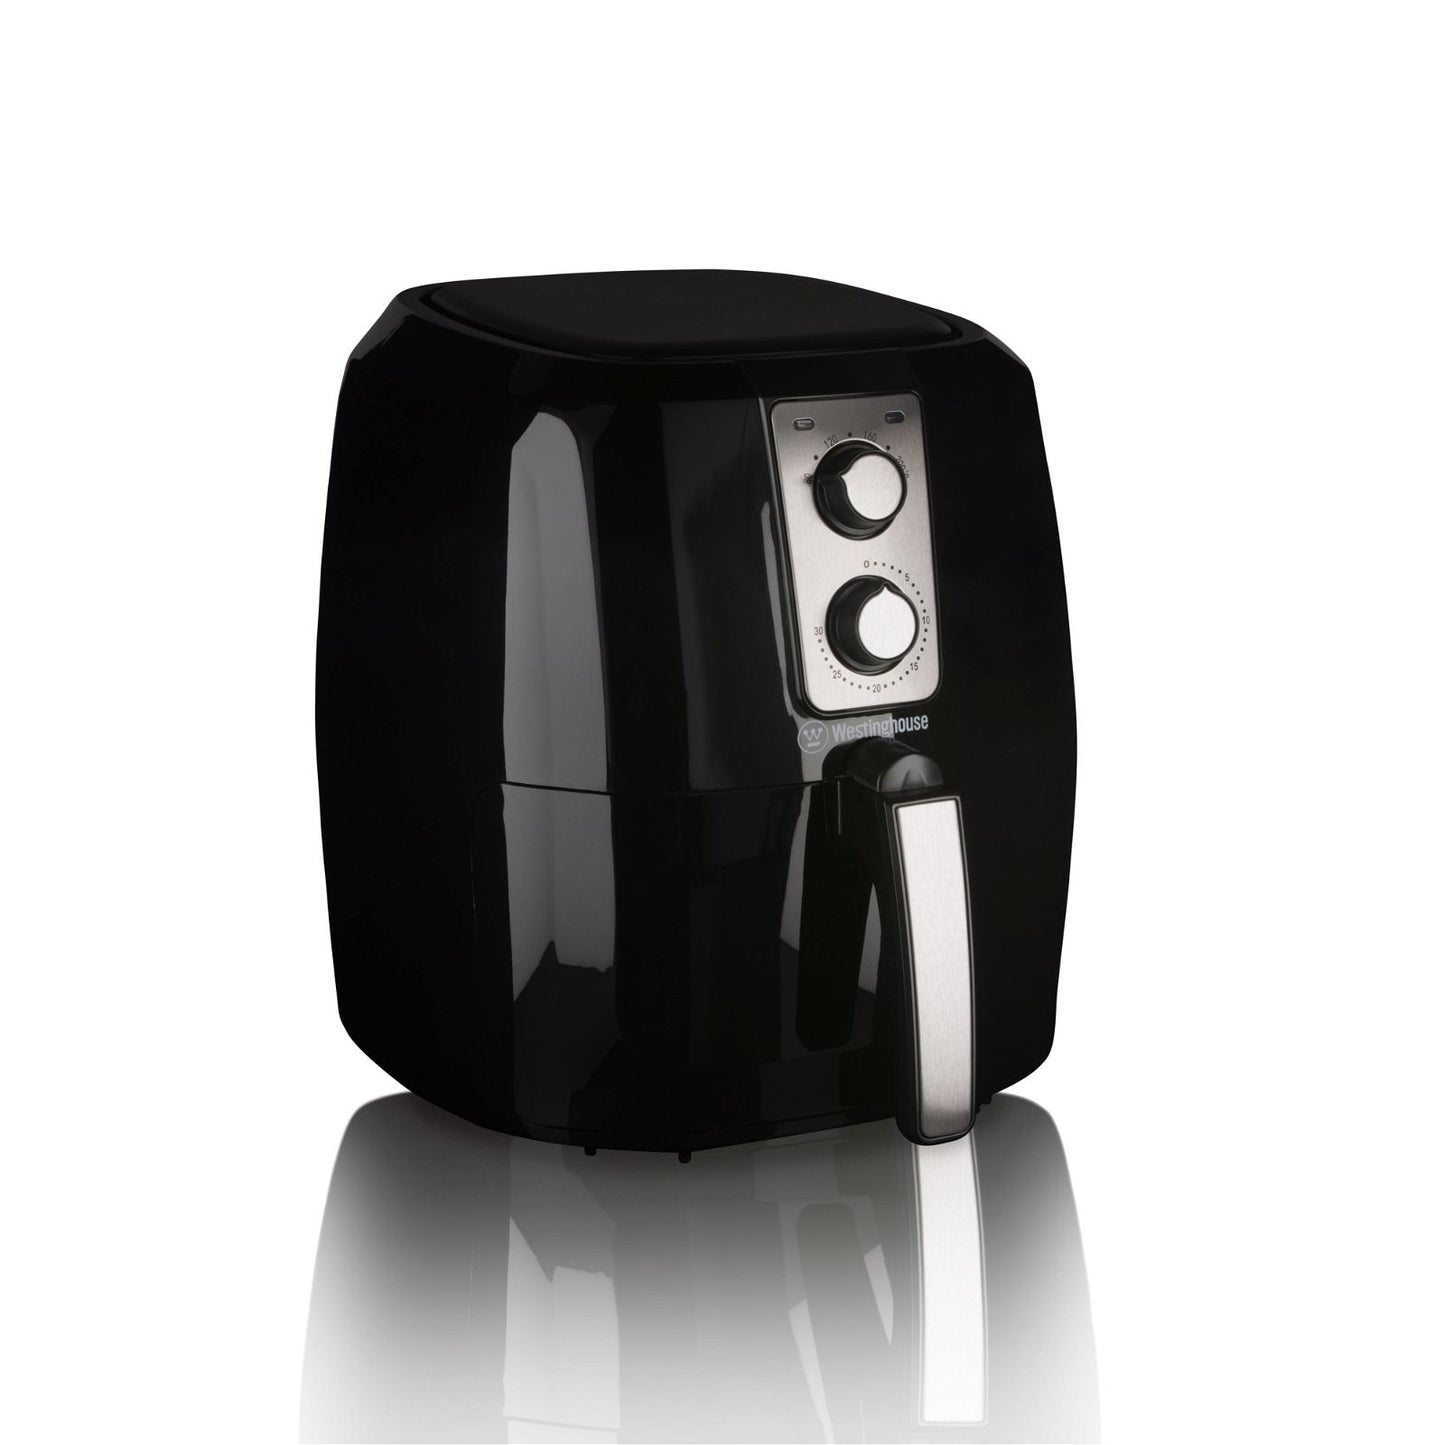 Westinghouse Air Fryer 1800W 5.2L-#product_category#- Distributed by:  under license